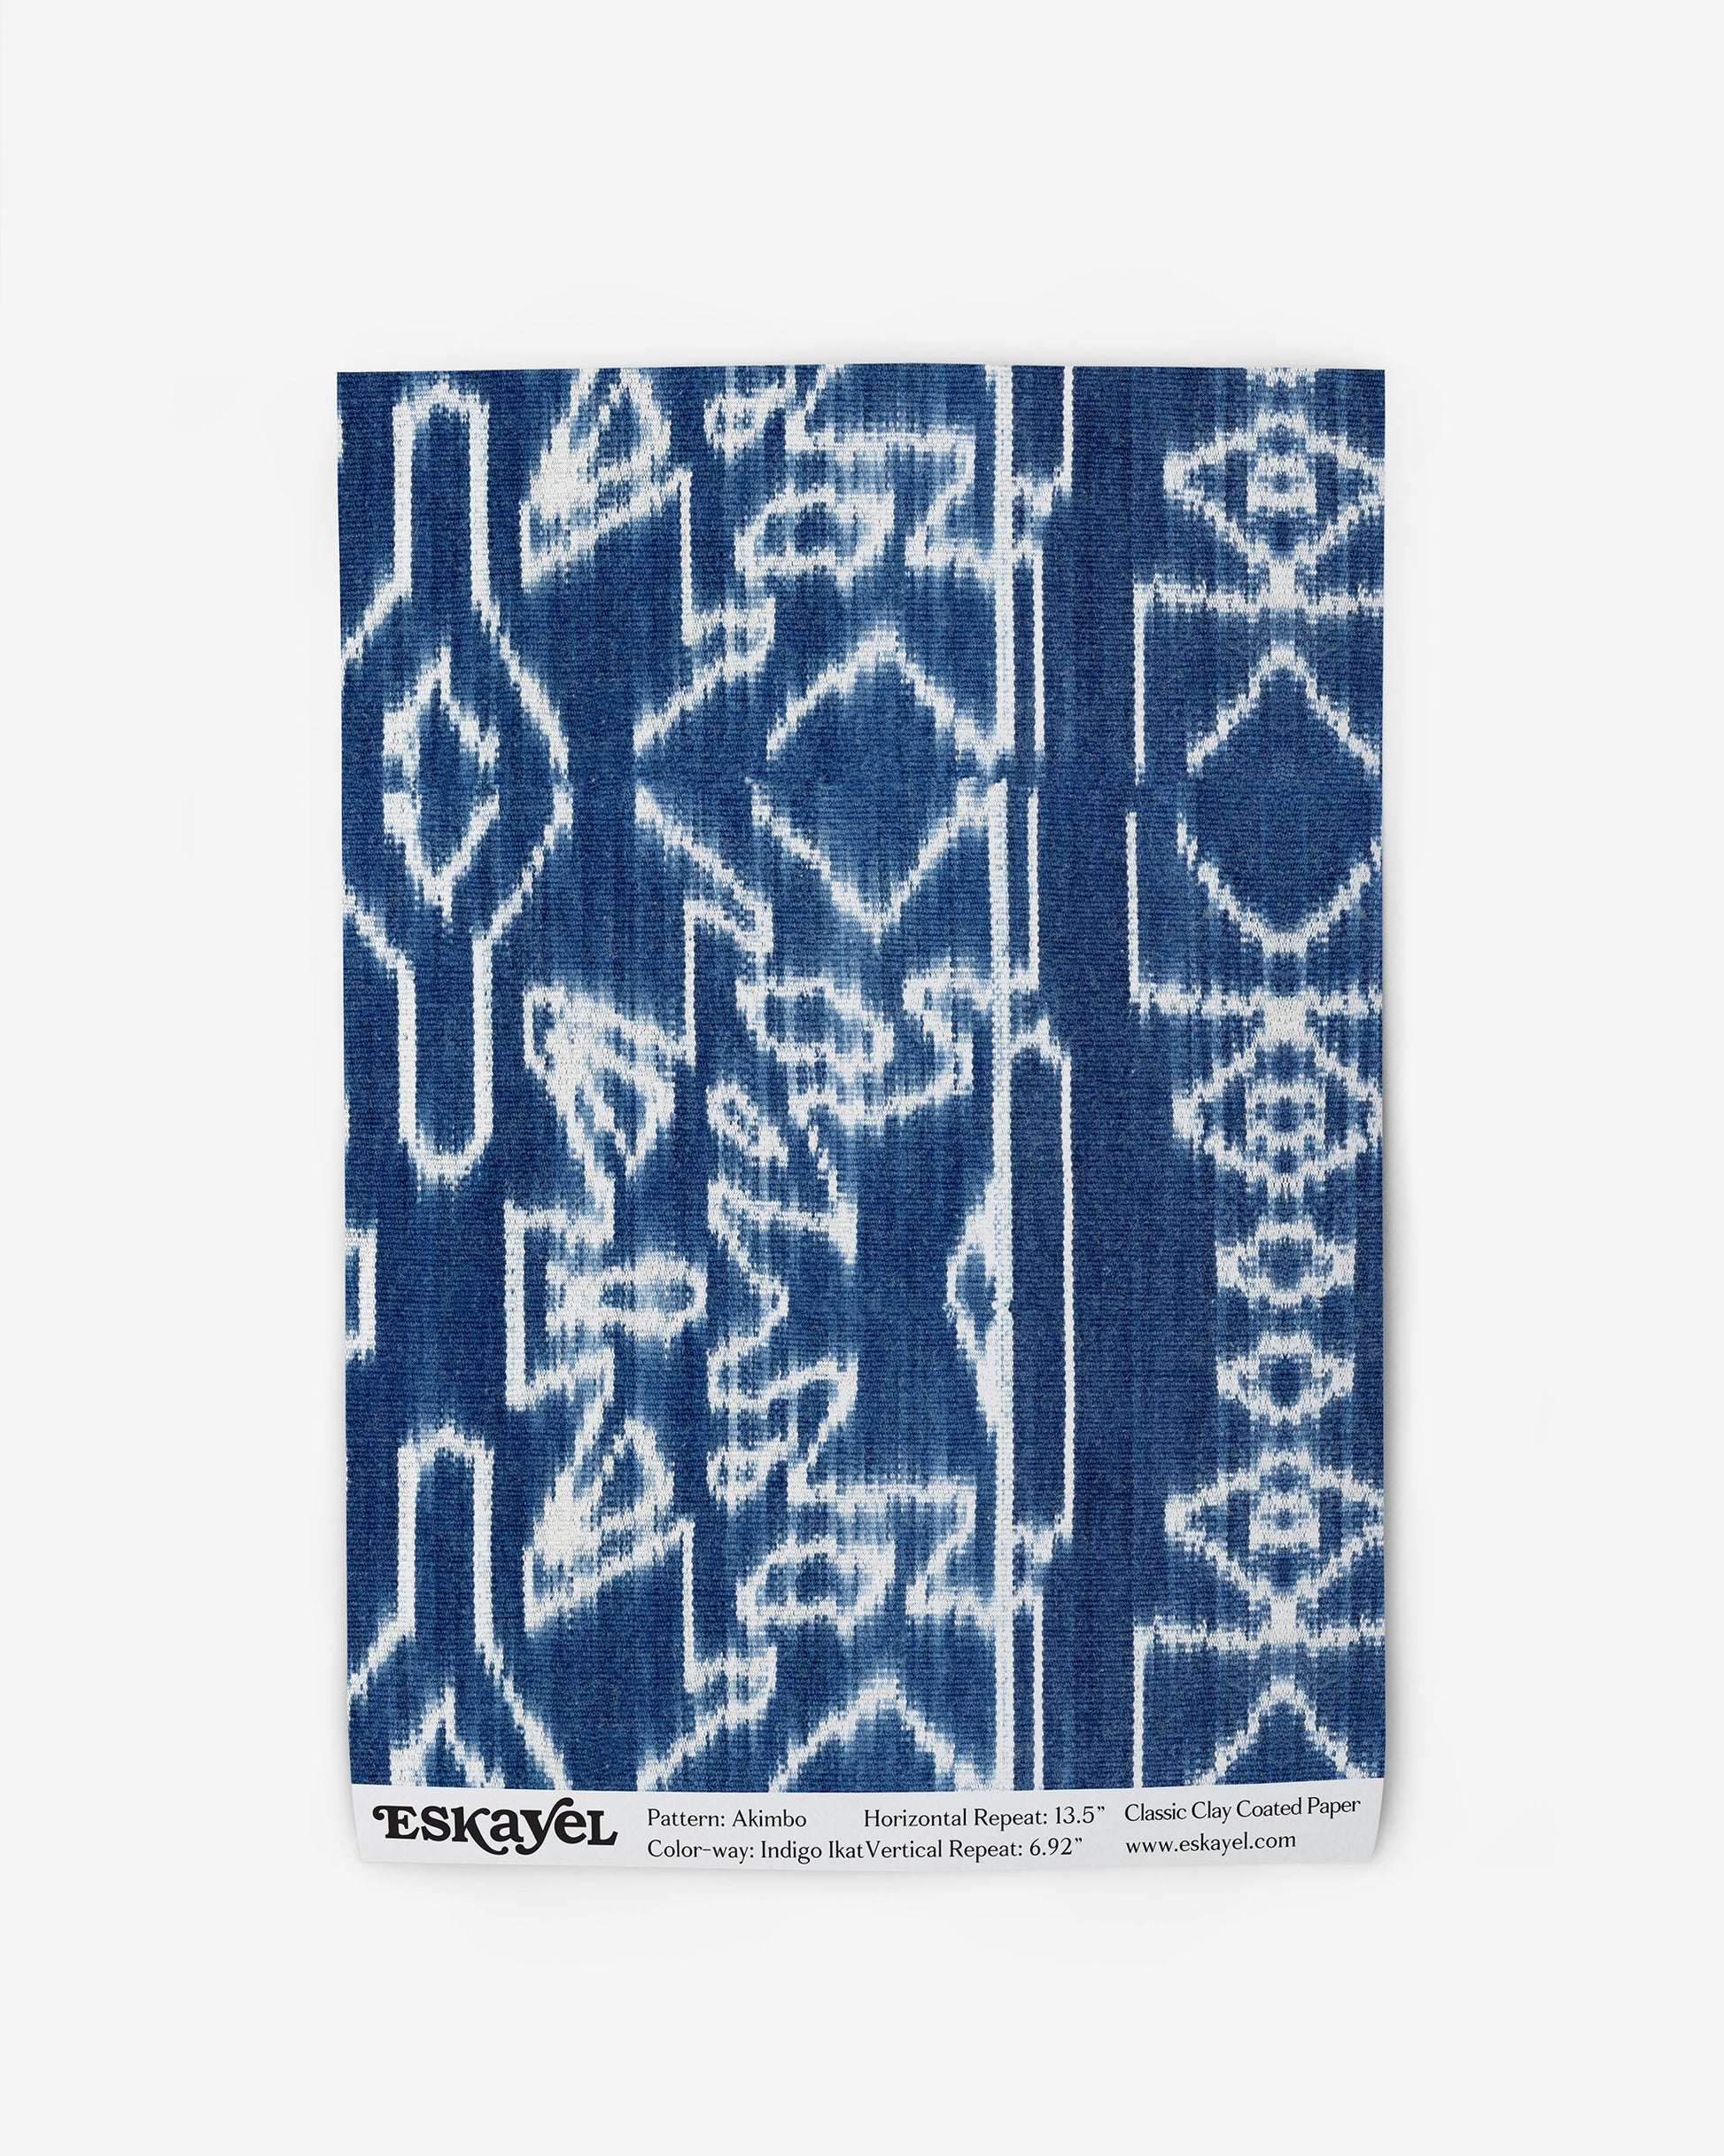 A blue and white Akimbo Wallpaper Indigo Ikat print with a graphic geometric pattern on wallpaper